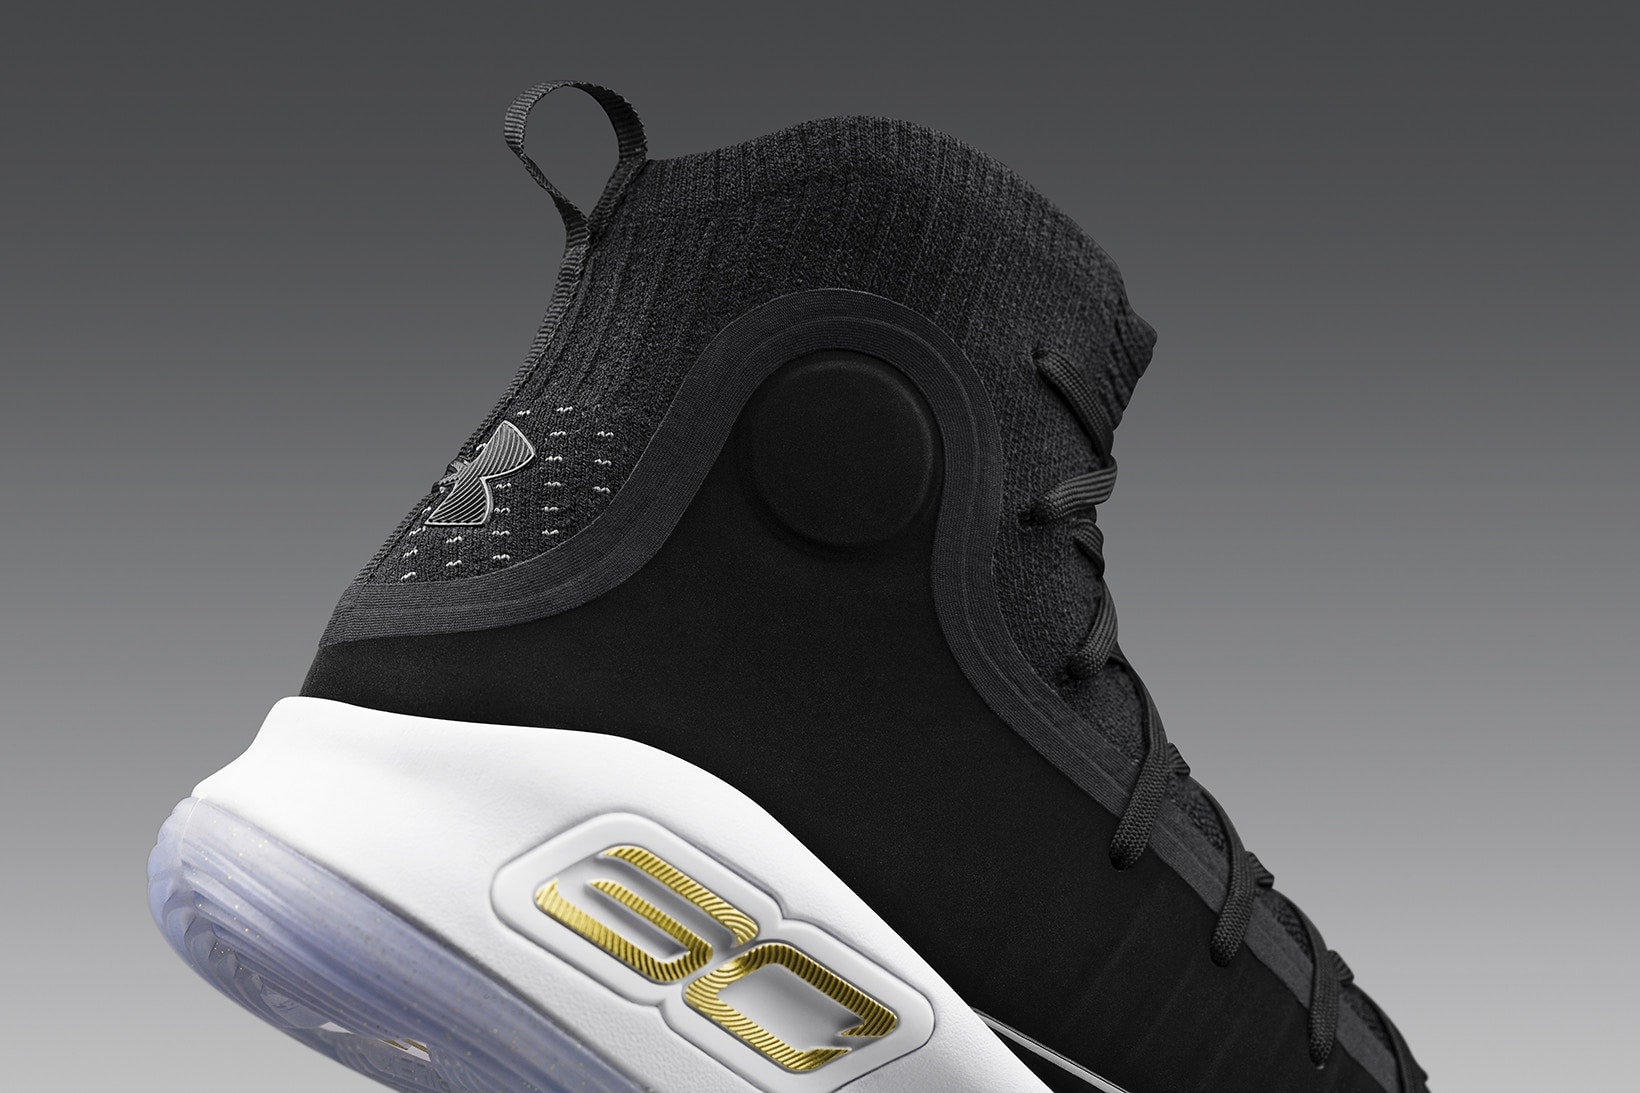 Under Armour Curry 4 全新配色设计「More Dimes」